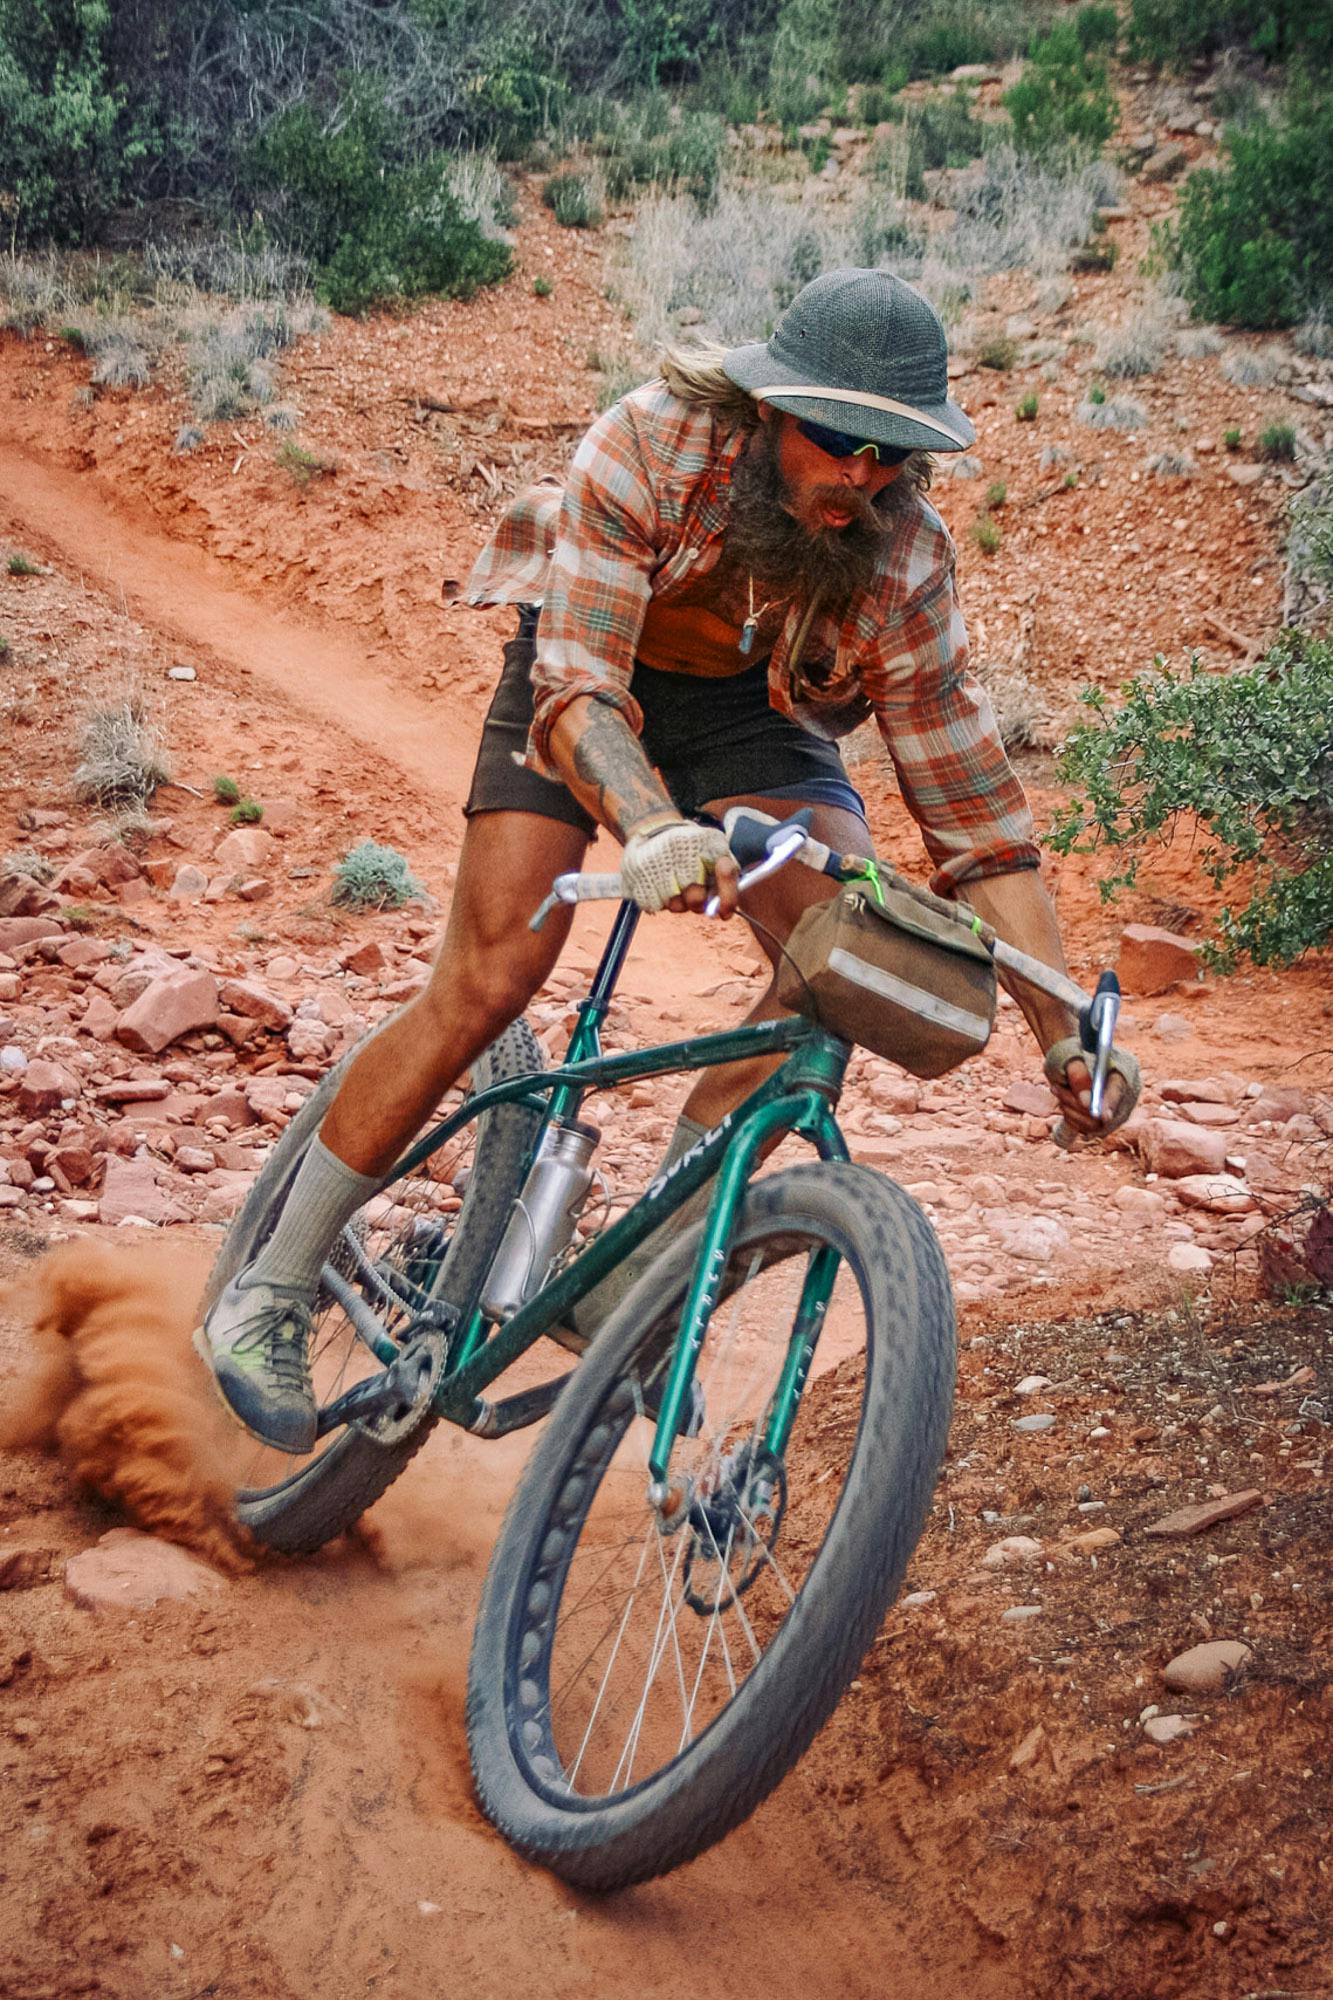 Ronnie shredding on his old Surly Krampus.